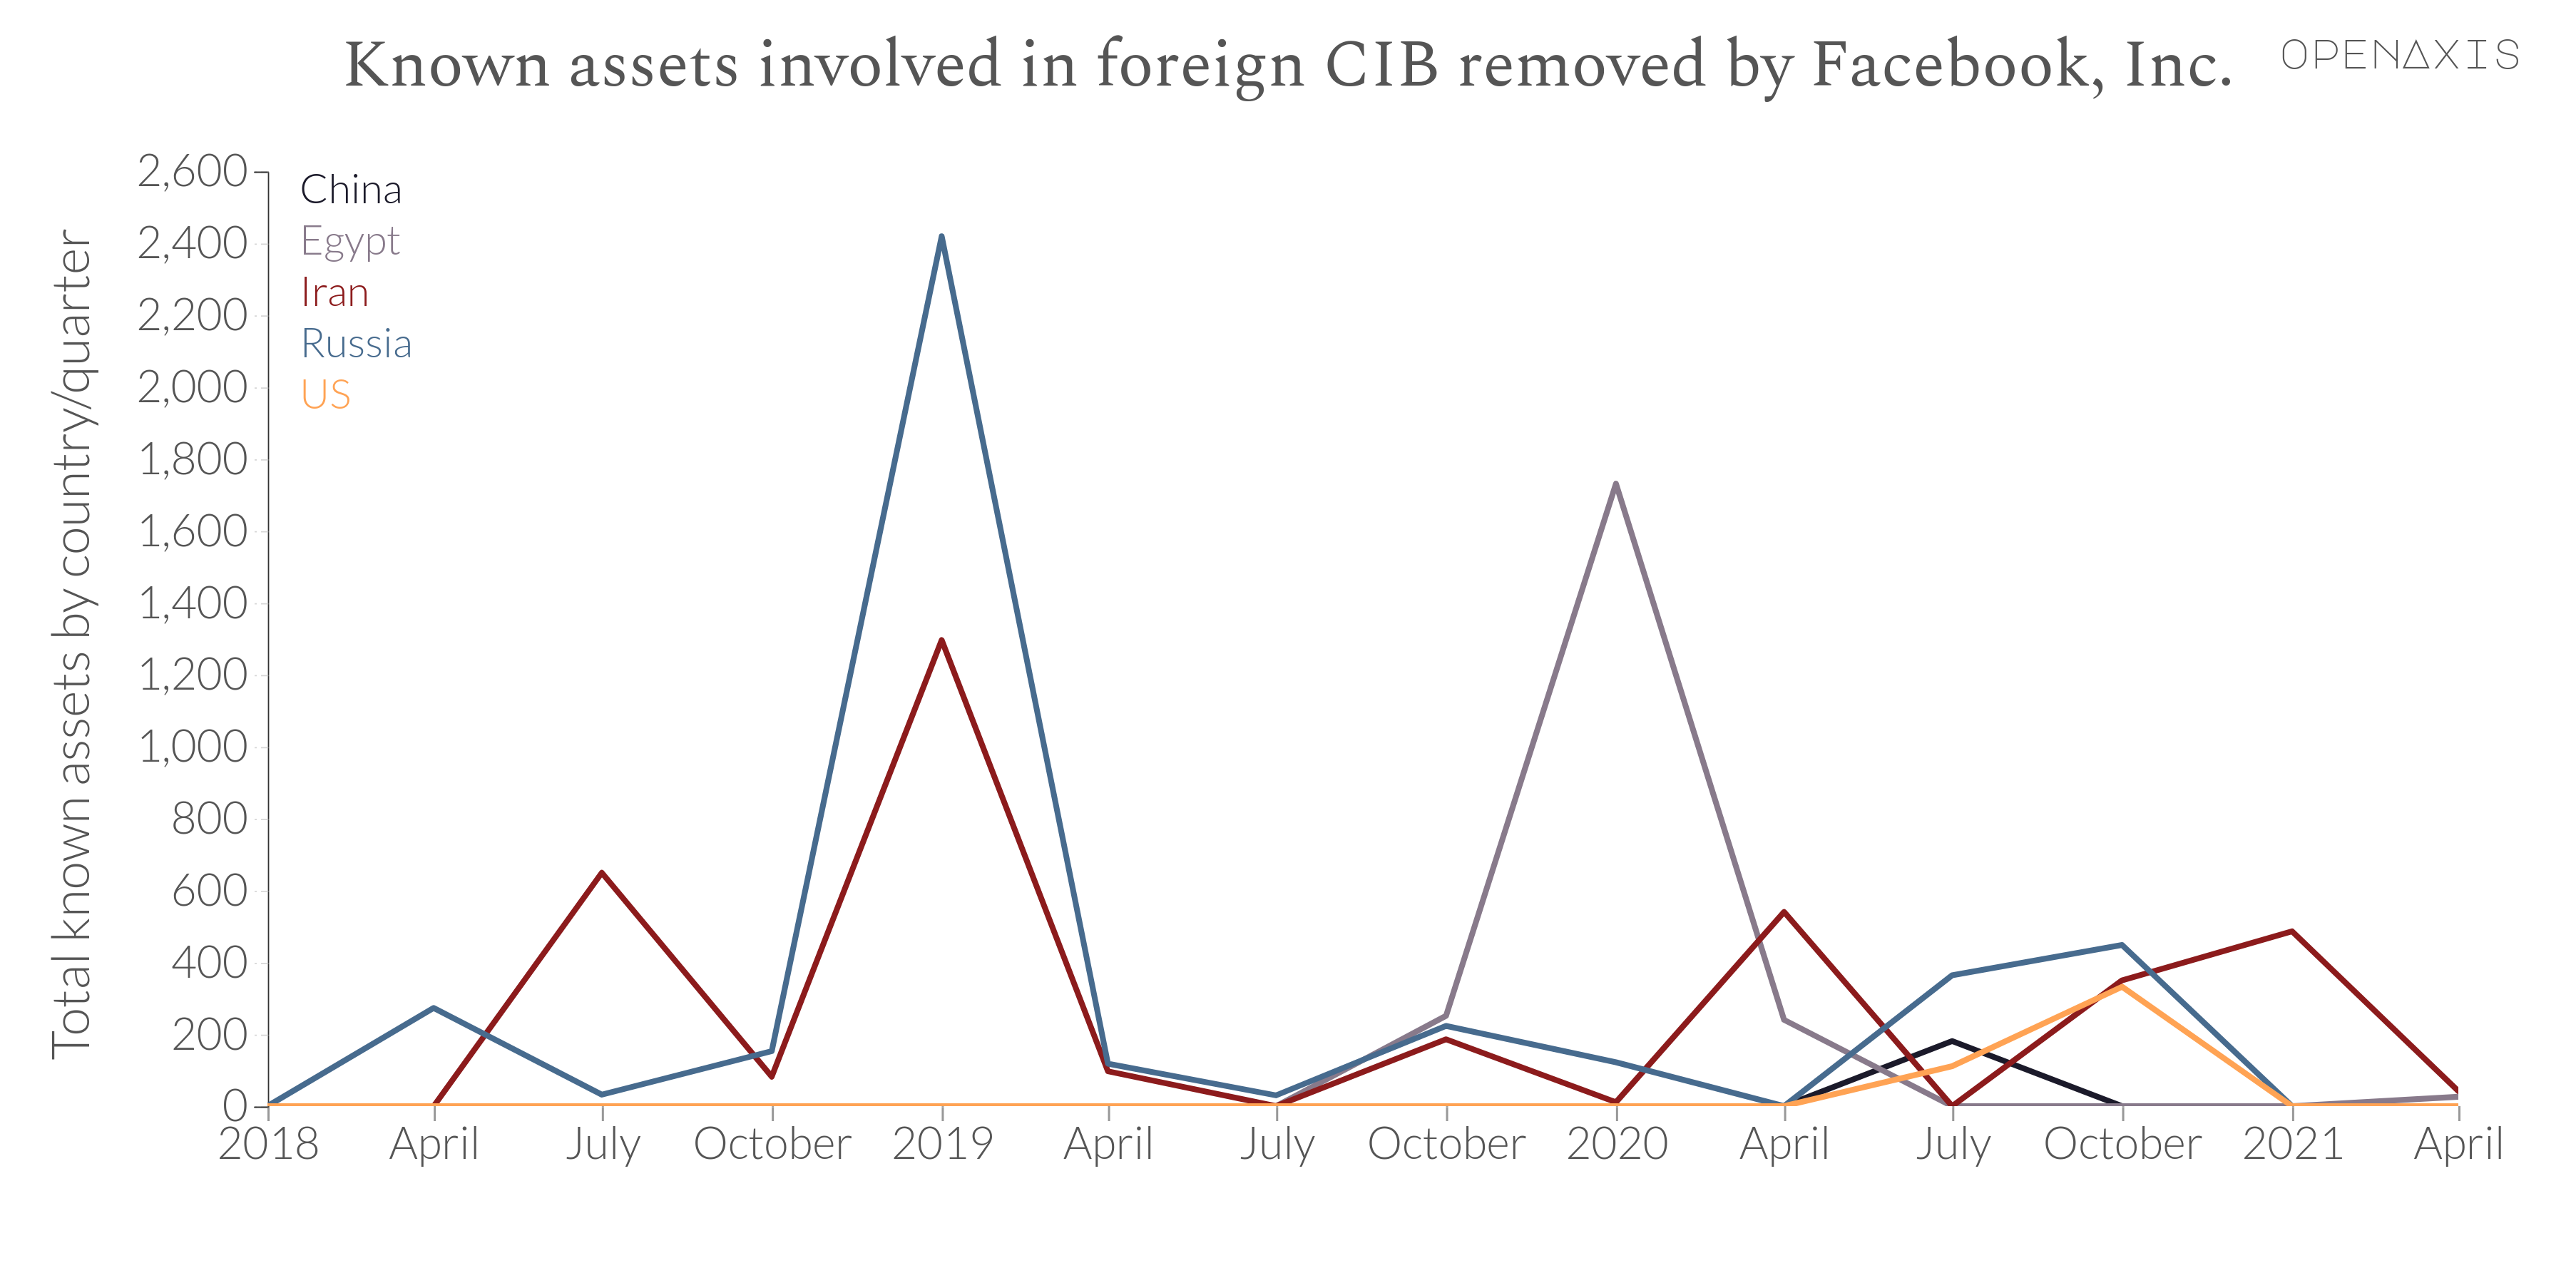 "Known assets involved in foreign CIB removed by Facebook, Inc."